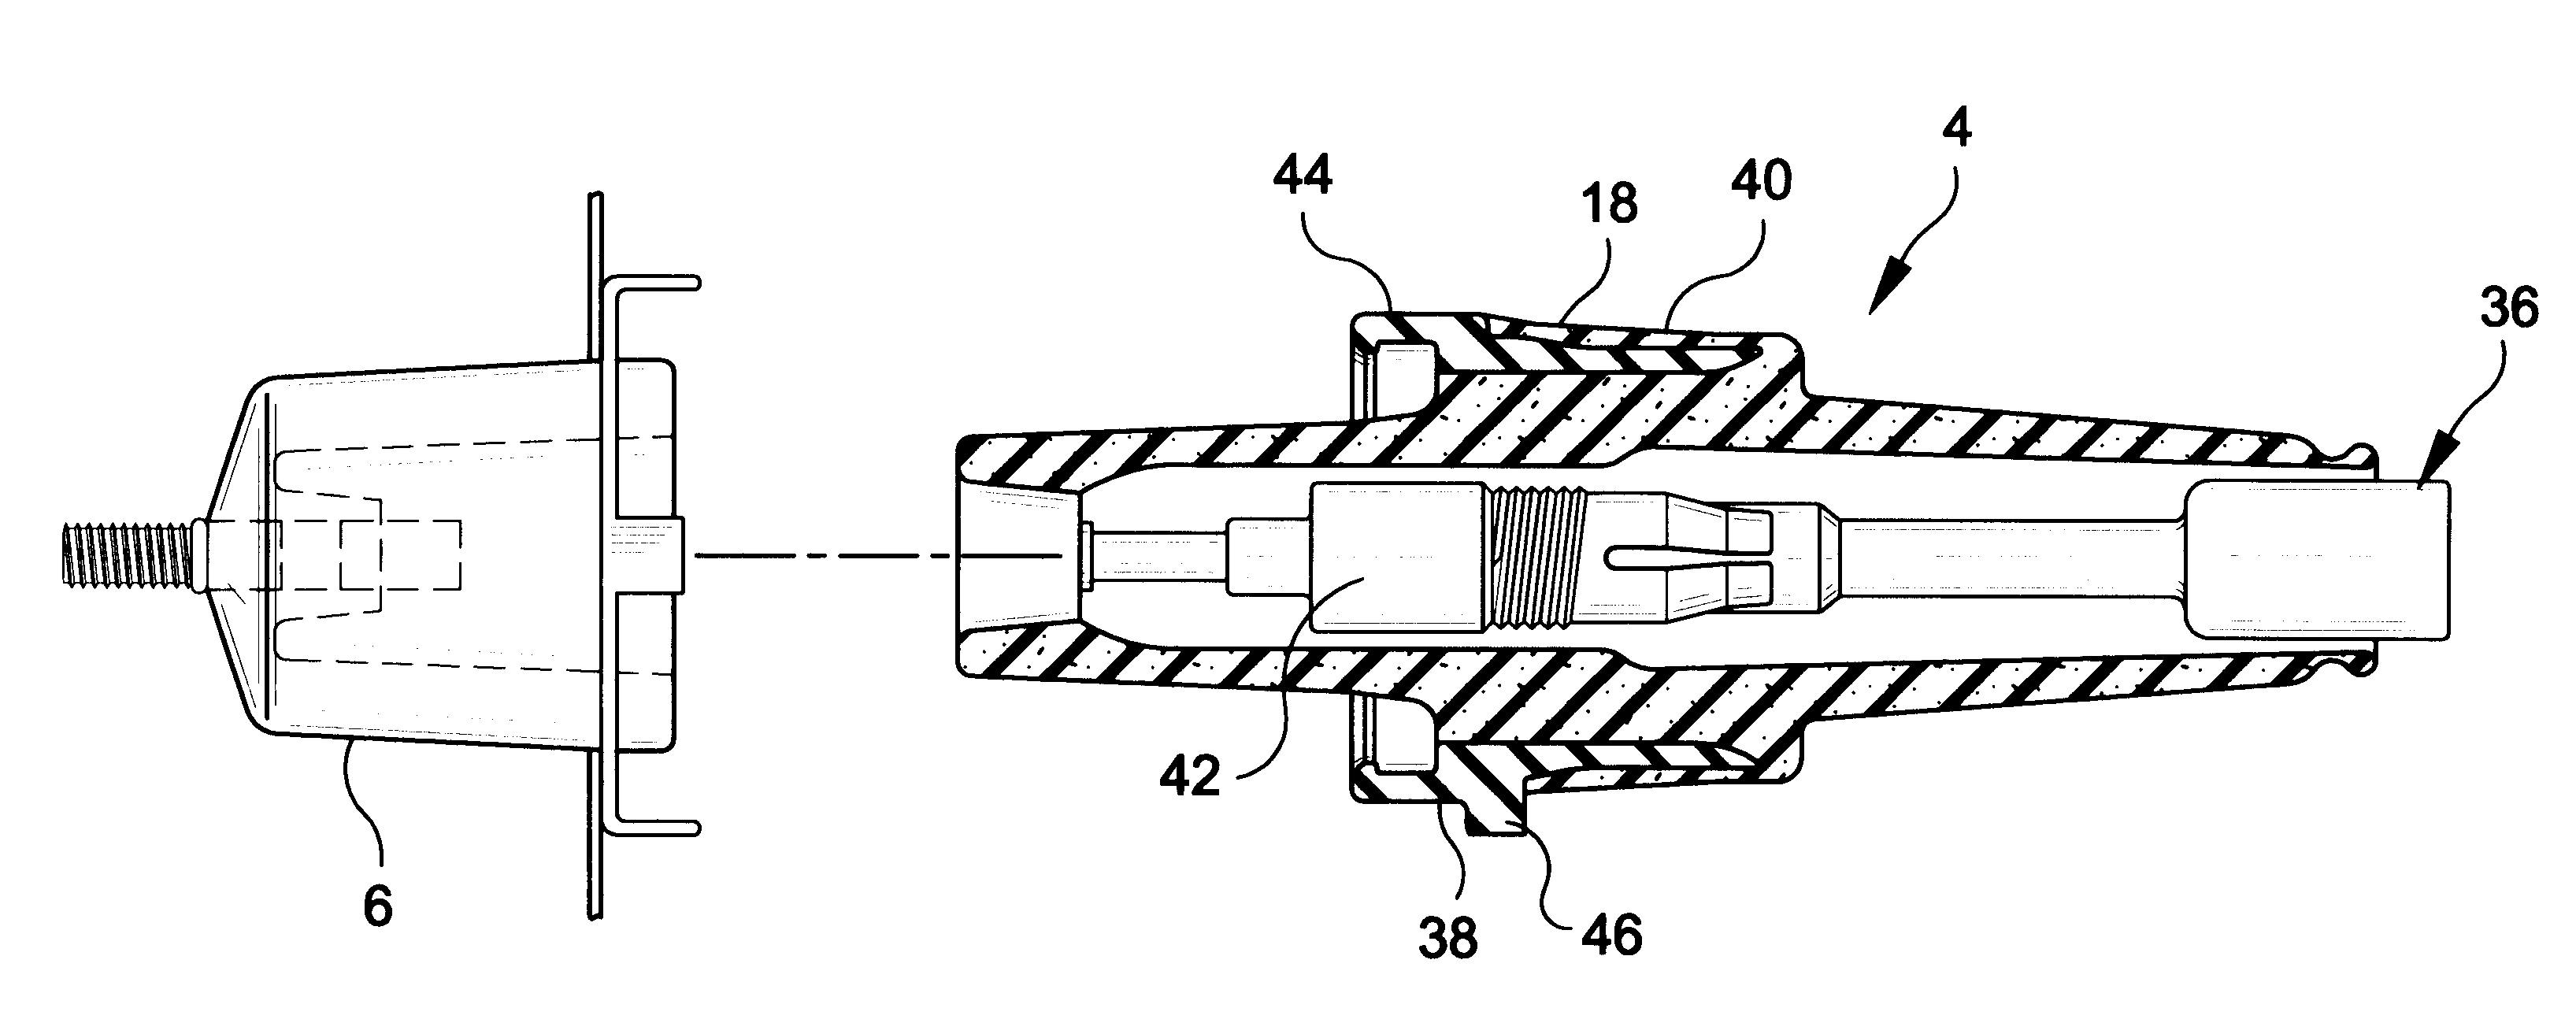 Loadbreak connector assembly which prevents switching flashover